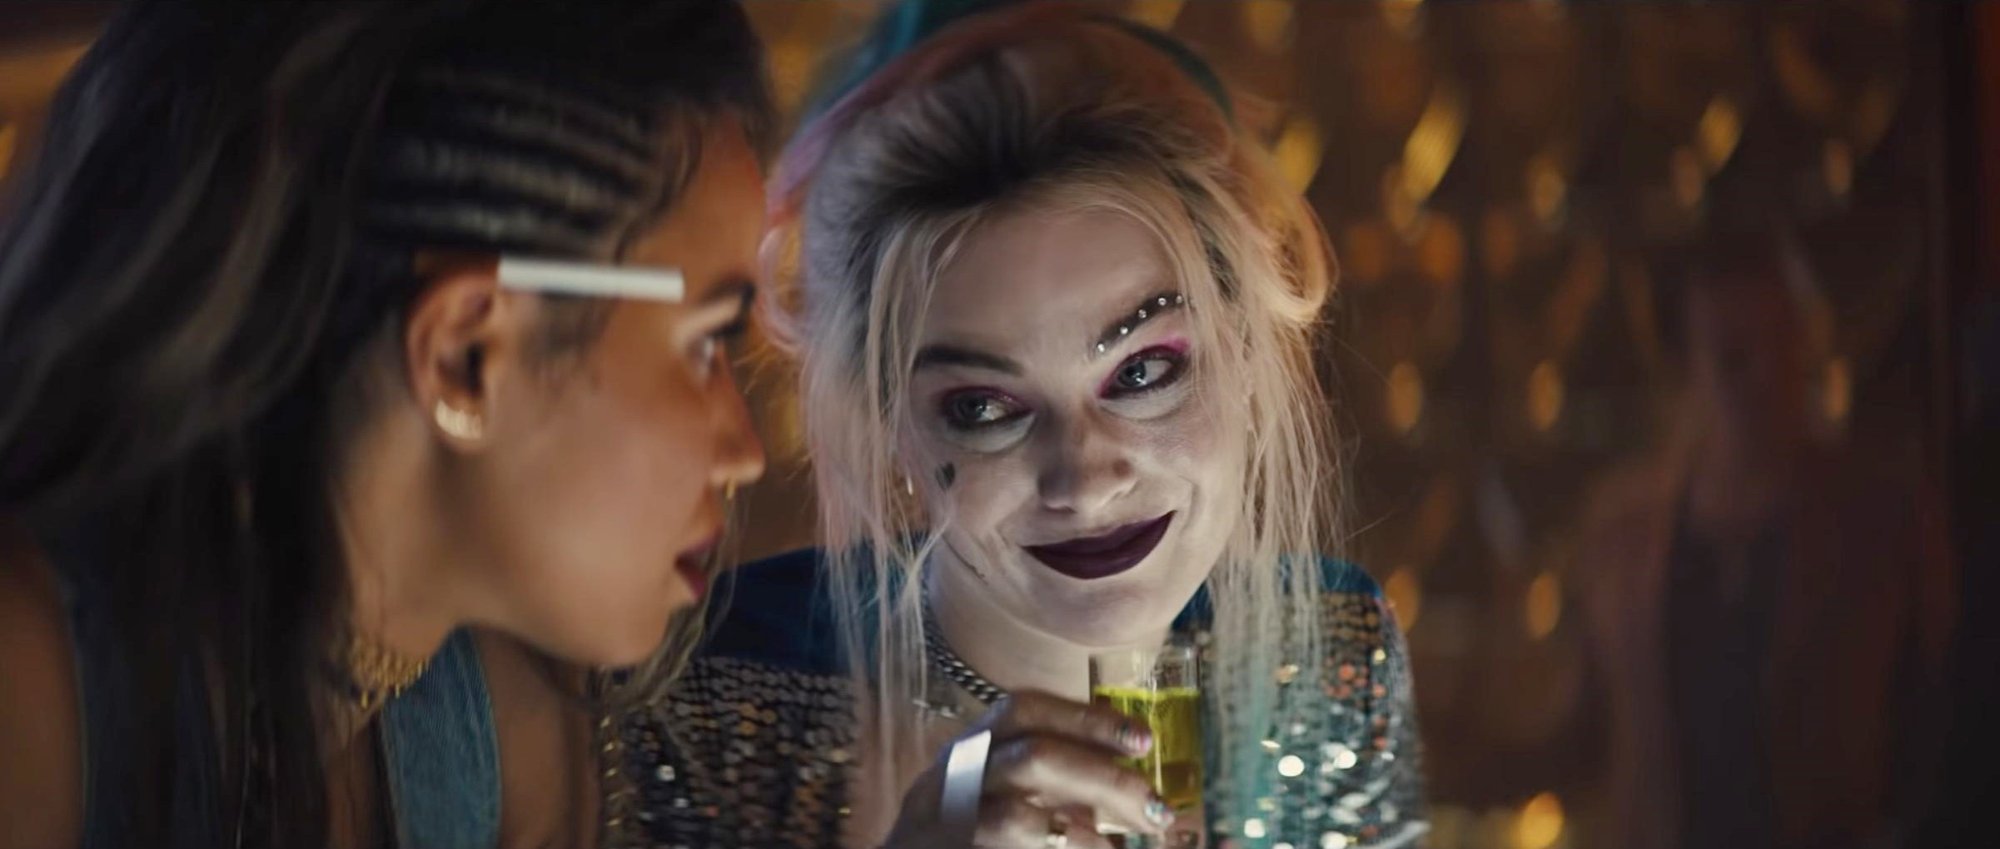 Jurnee Smollett stars as Dinah Lance/Black Canary and Margot Robbie stars as Harley Quinn in Warner Bros. Pictures' Birds of Prey: And the Fantabulous Emancipation of One Harley Quinn (2020)